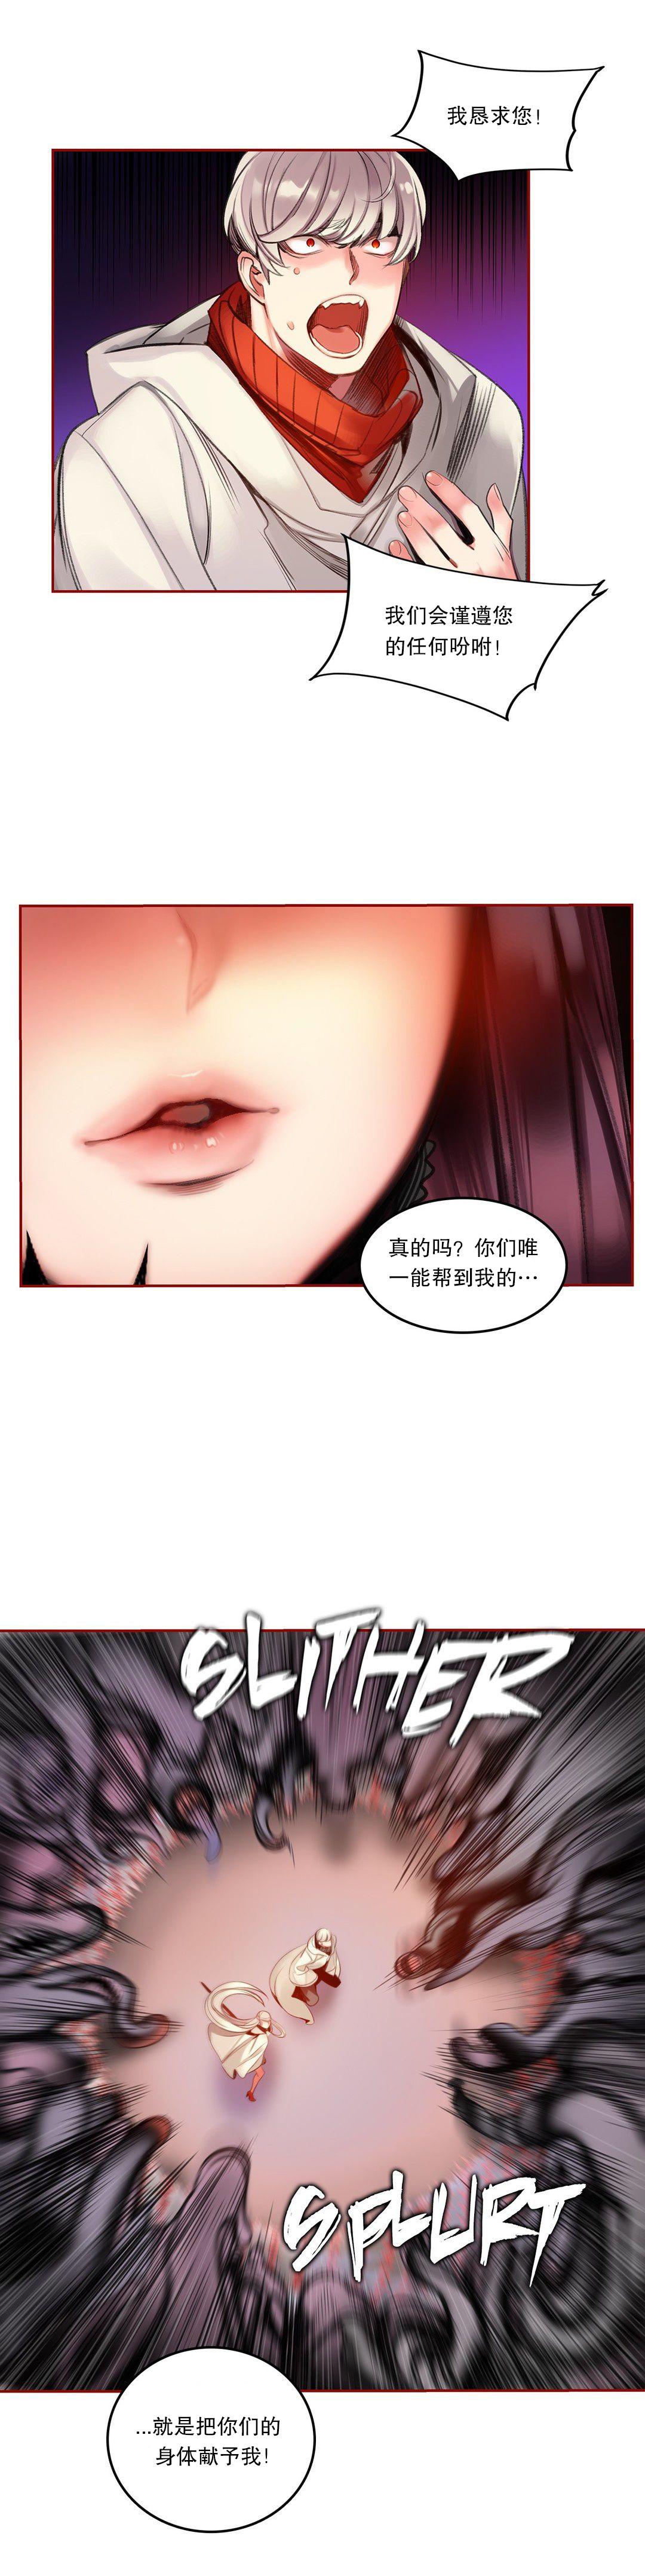 [Juder] Lilith`s Cord (第二季) Ch.61-68 [Chinese] [aaatwist个人汉化] [Ongoing] 86